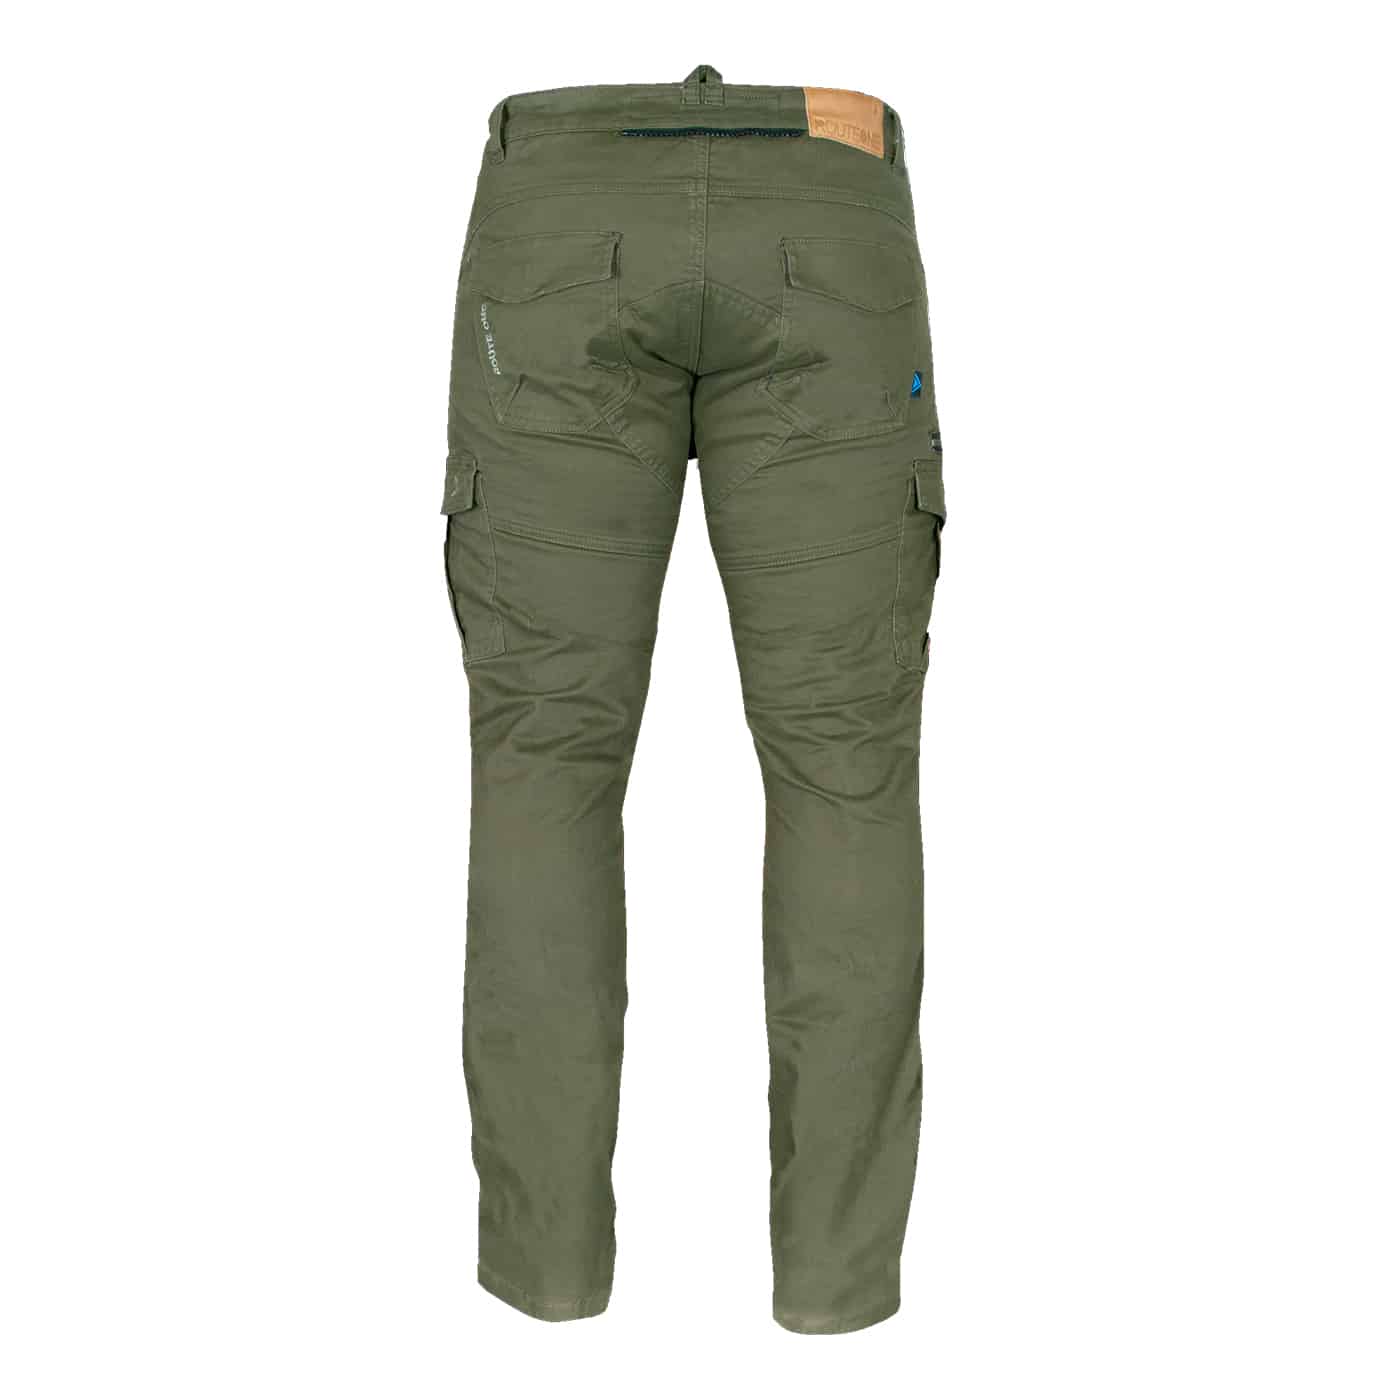 Route One Merlin Remy cargo protective motorcycle jean in green